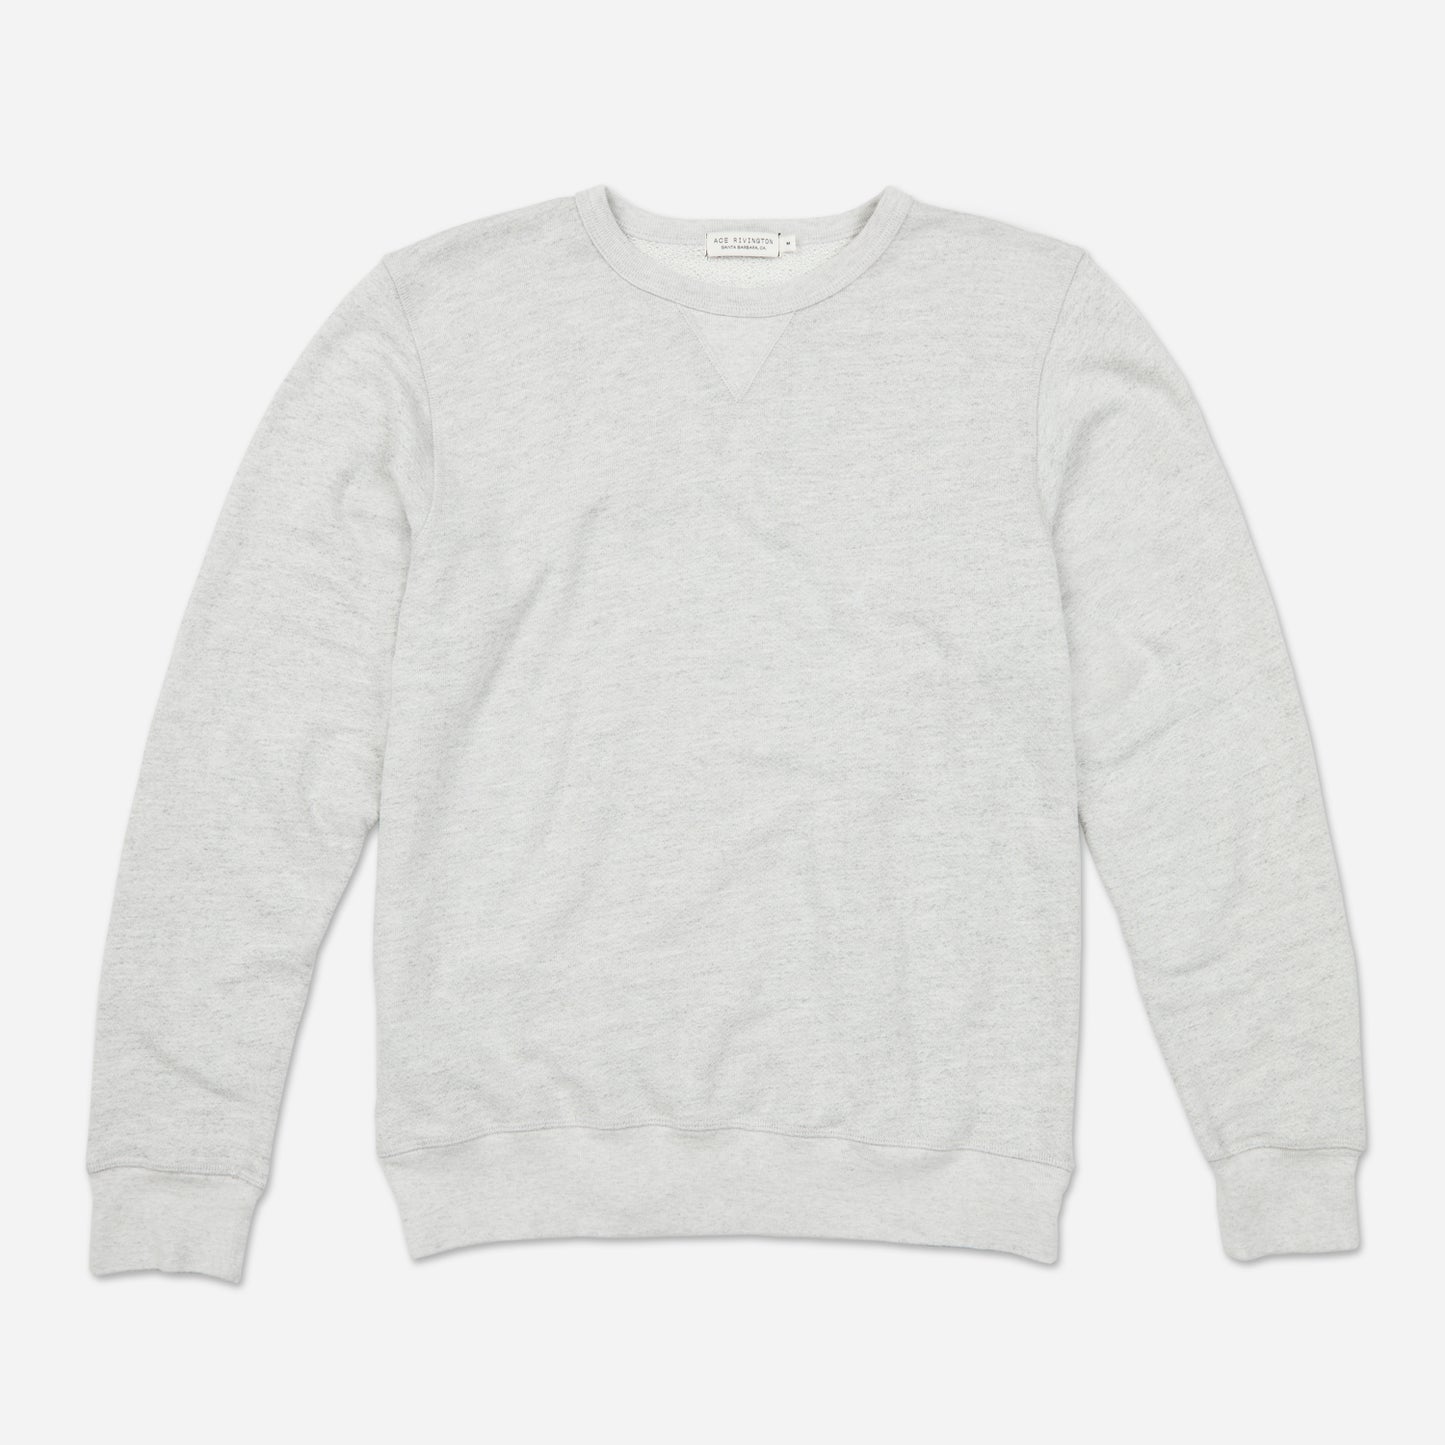 front of fully extended off white grey homespun french terry crew neck sweatshirt with white accent stitching